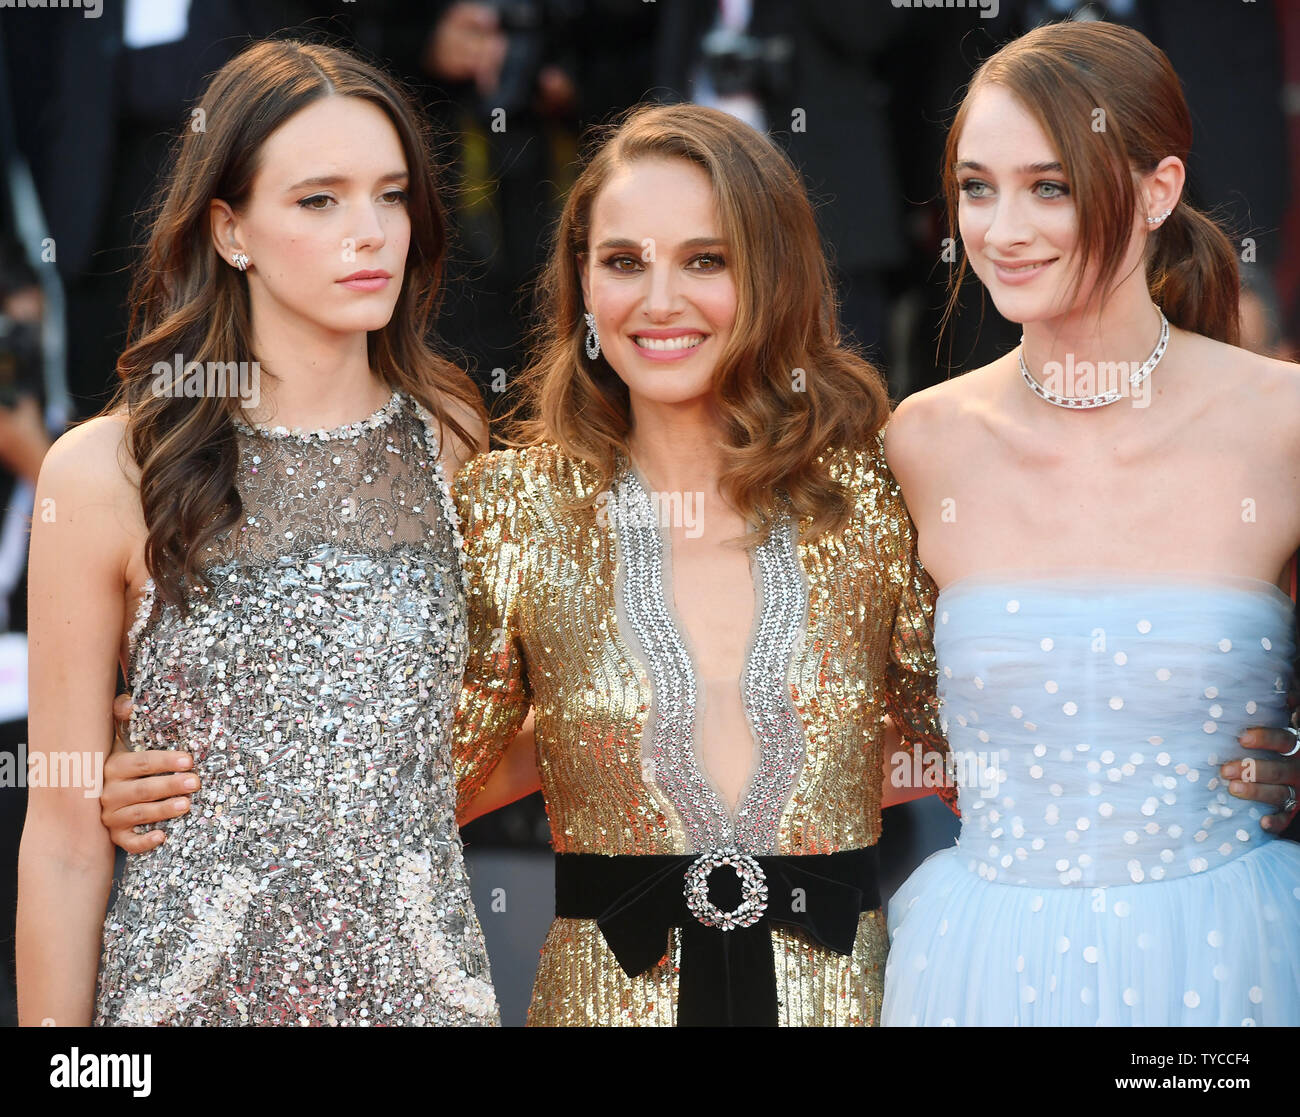 British actresses Raffey Cassidy and Stacy Martin and American actress Natalie Portman attend the premiere of Vox Lux at the 75th Venice Film Festival on September 4, 2018. Photo by Rune Hellestad/UPI Stock Photo